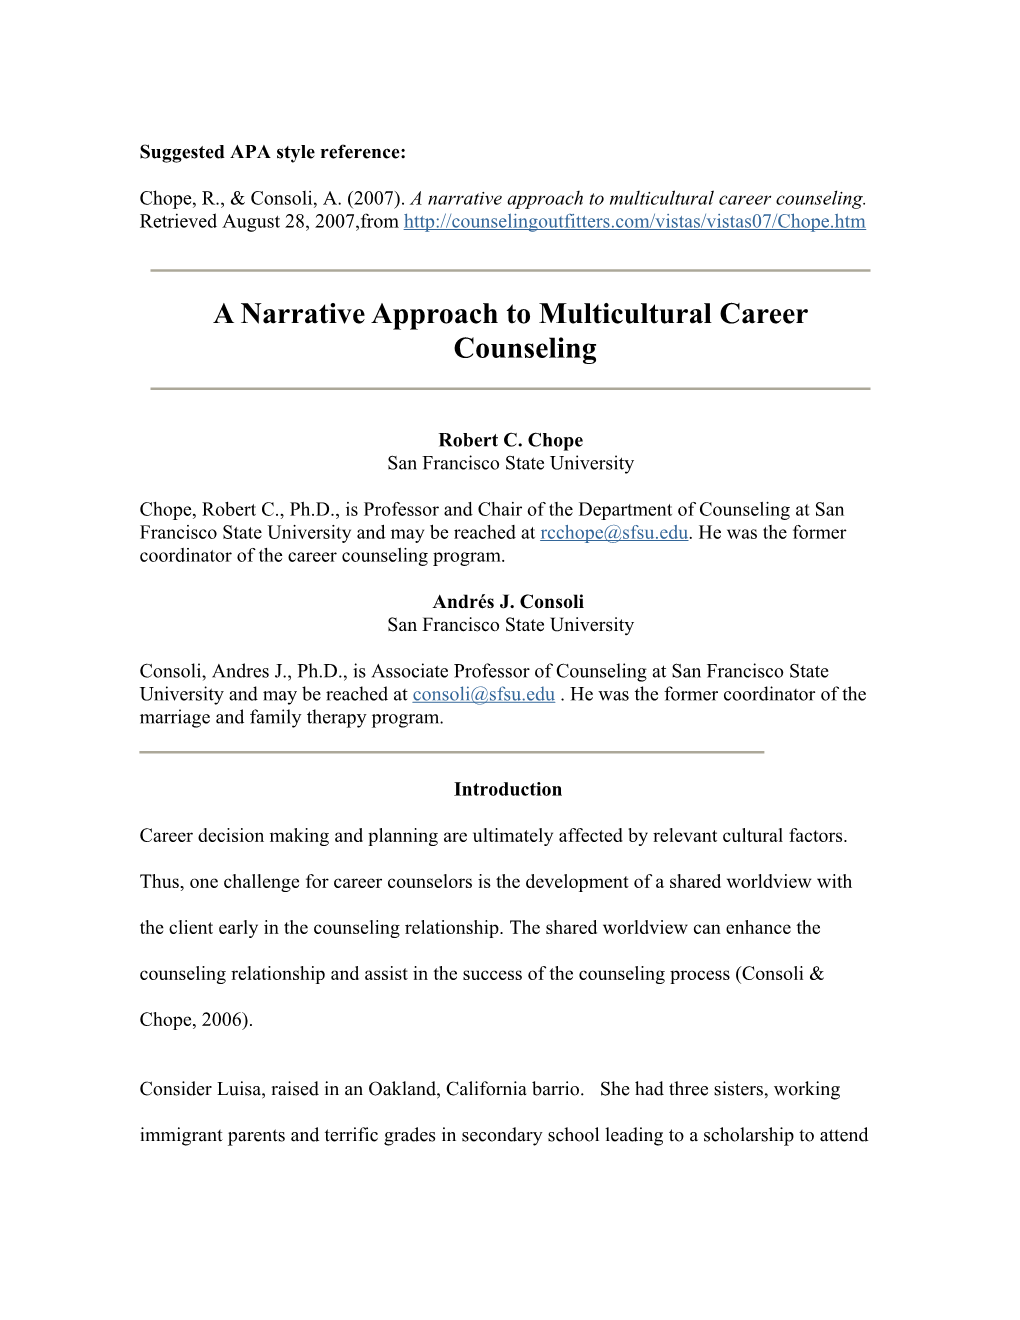 A Narrative Approach to Multicultural Career Counseling